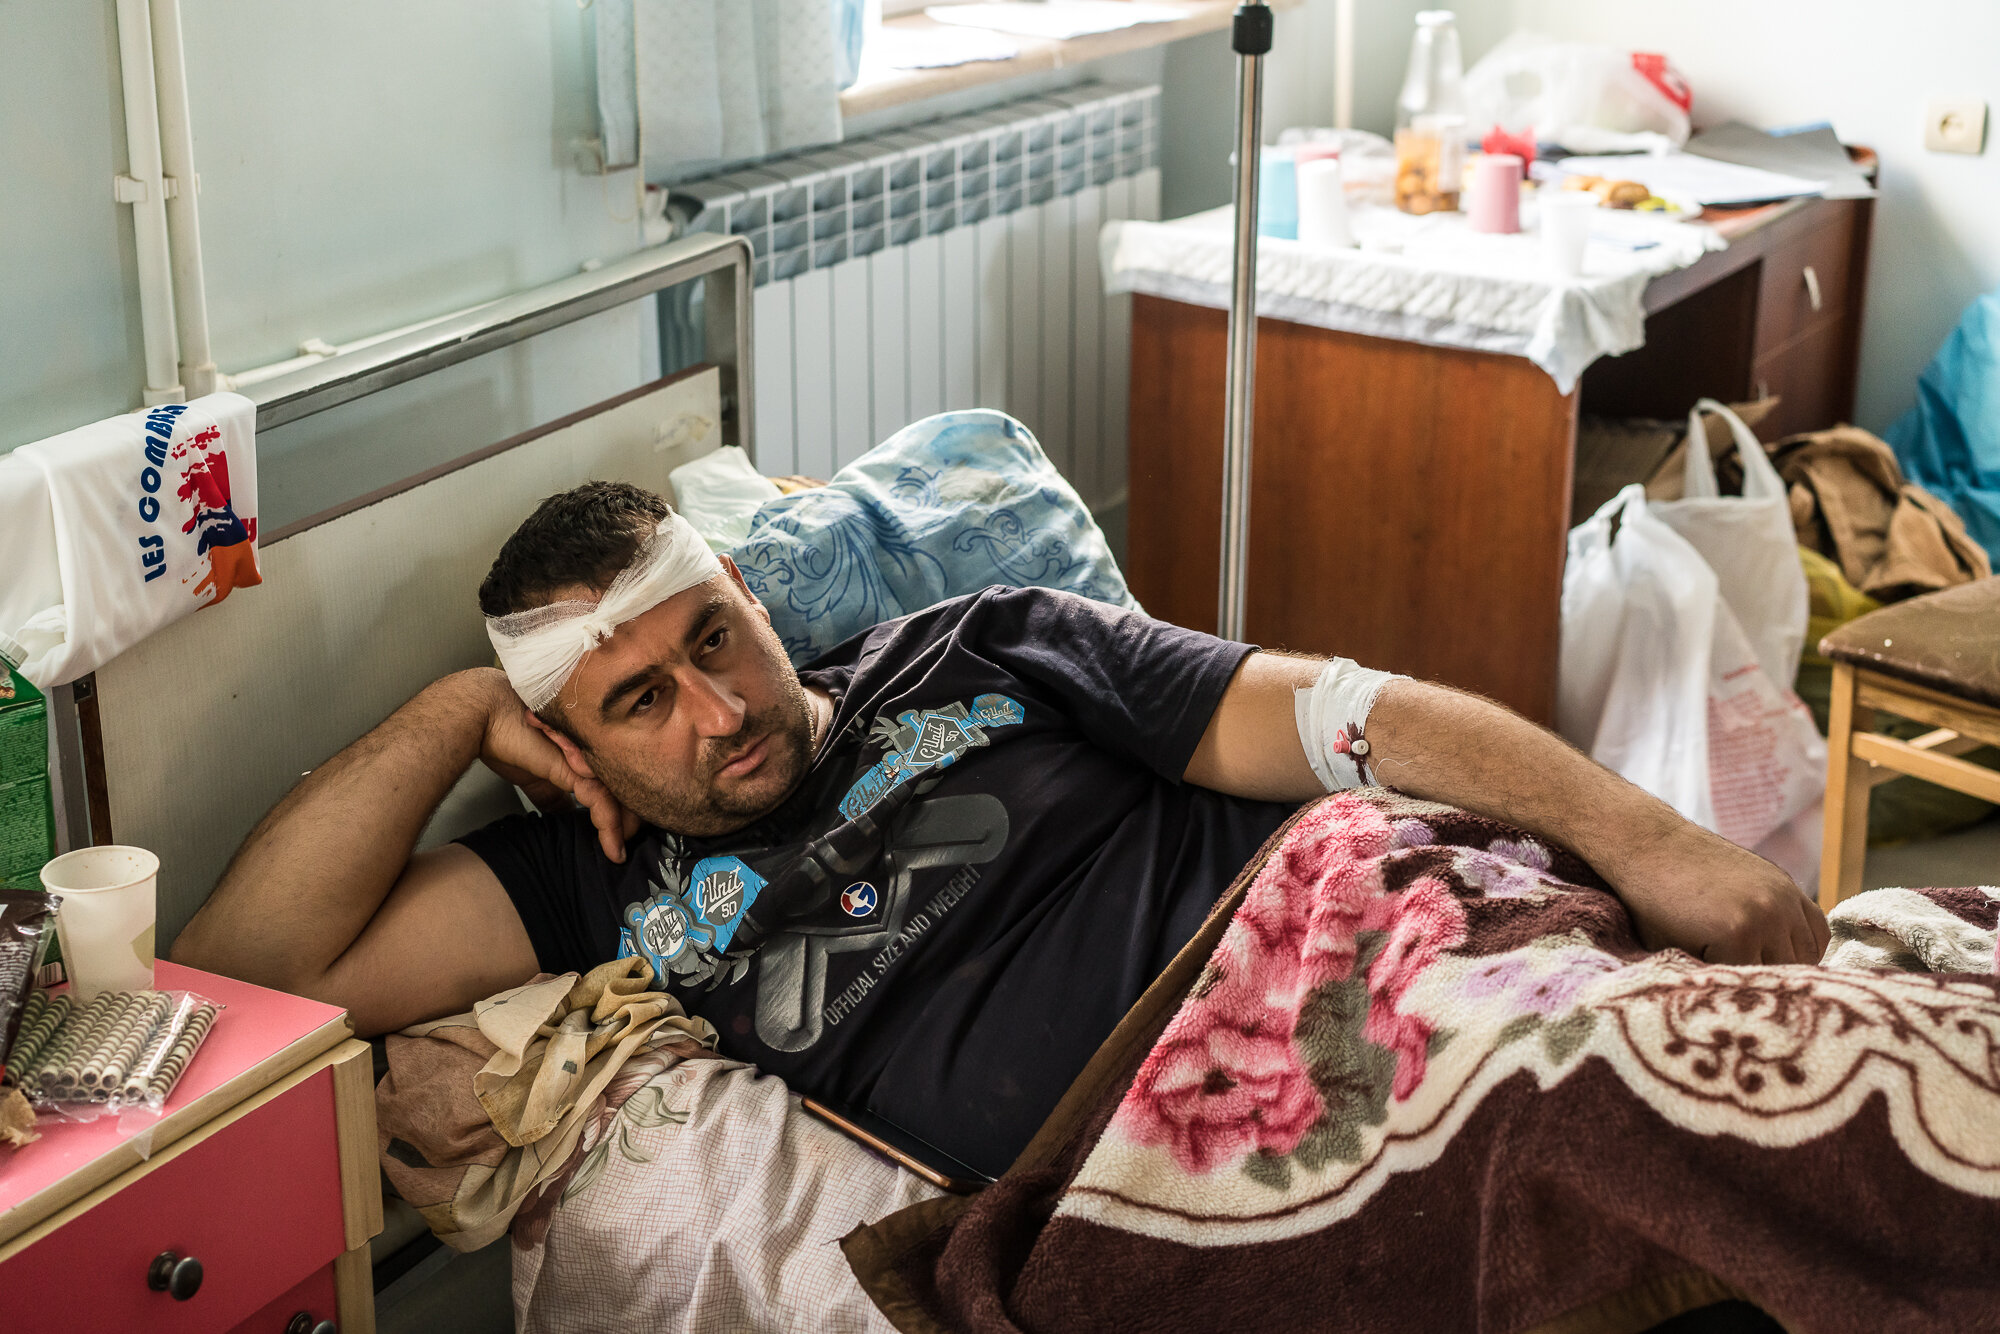  Aghajan, an Armenian soldier wounded in fighting the previous day, lies in his hospital bed. Stepanakert, Nagorno-Karabakh. 2020. 